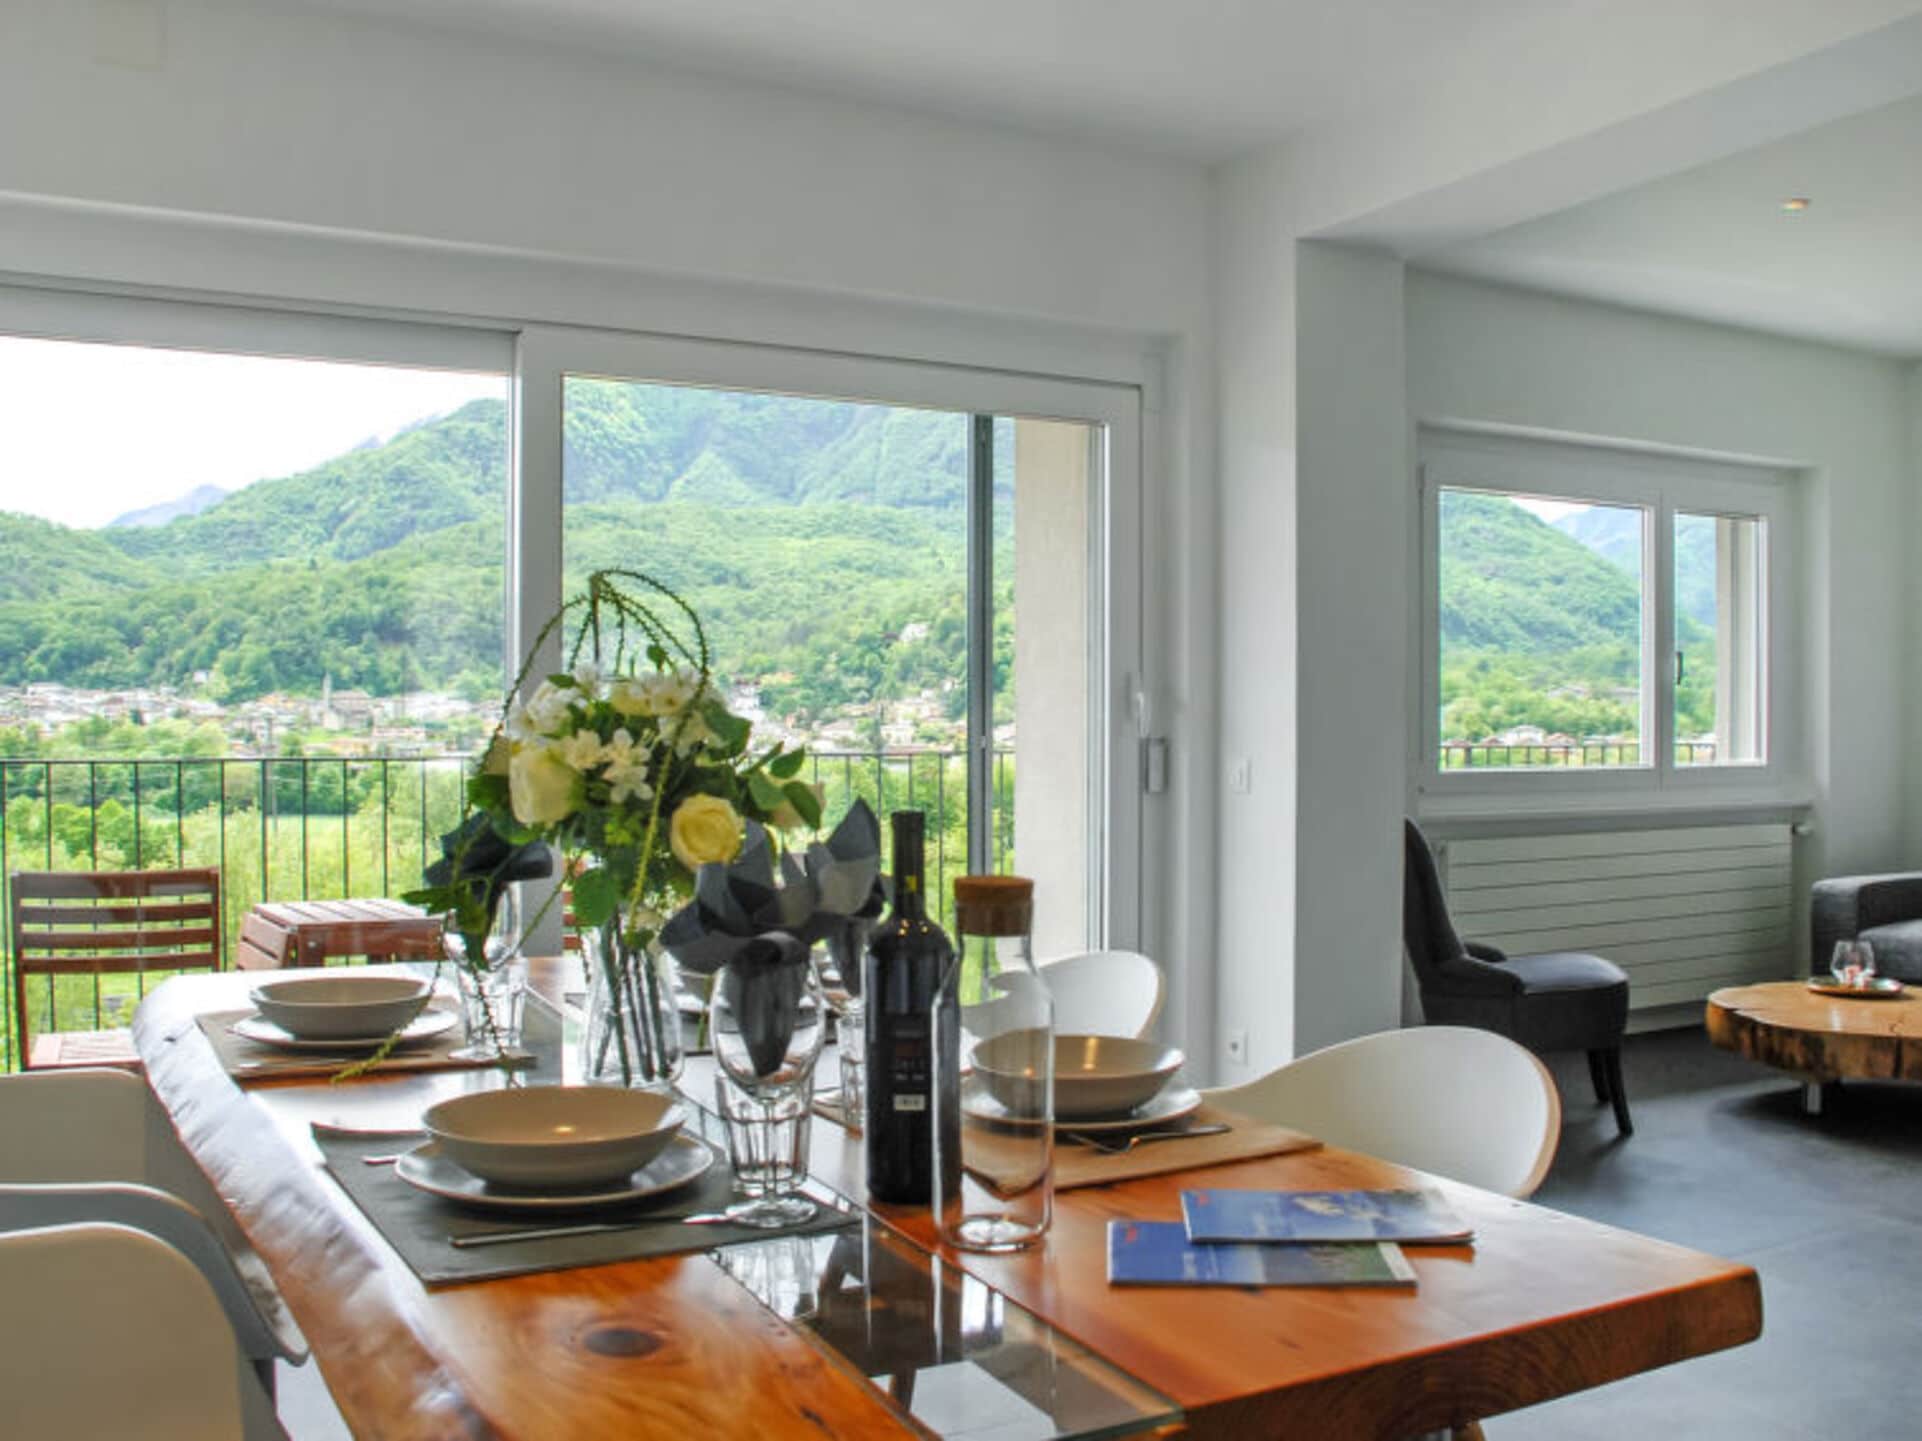 Property Image 1 - Property Manager Villa with First Class Amenities, Ticino Villa 1051